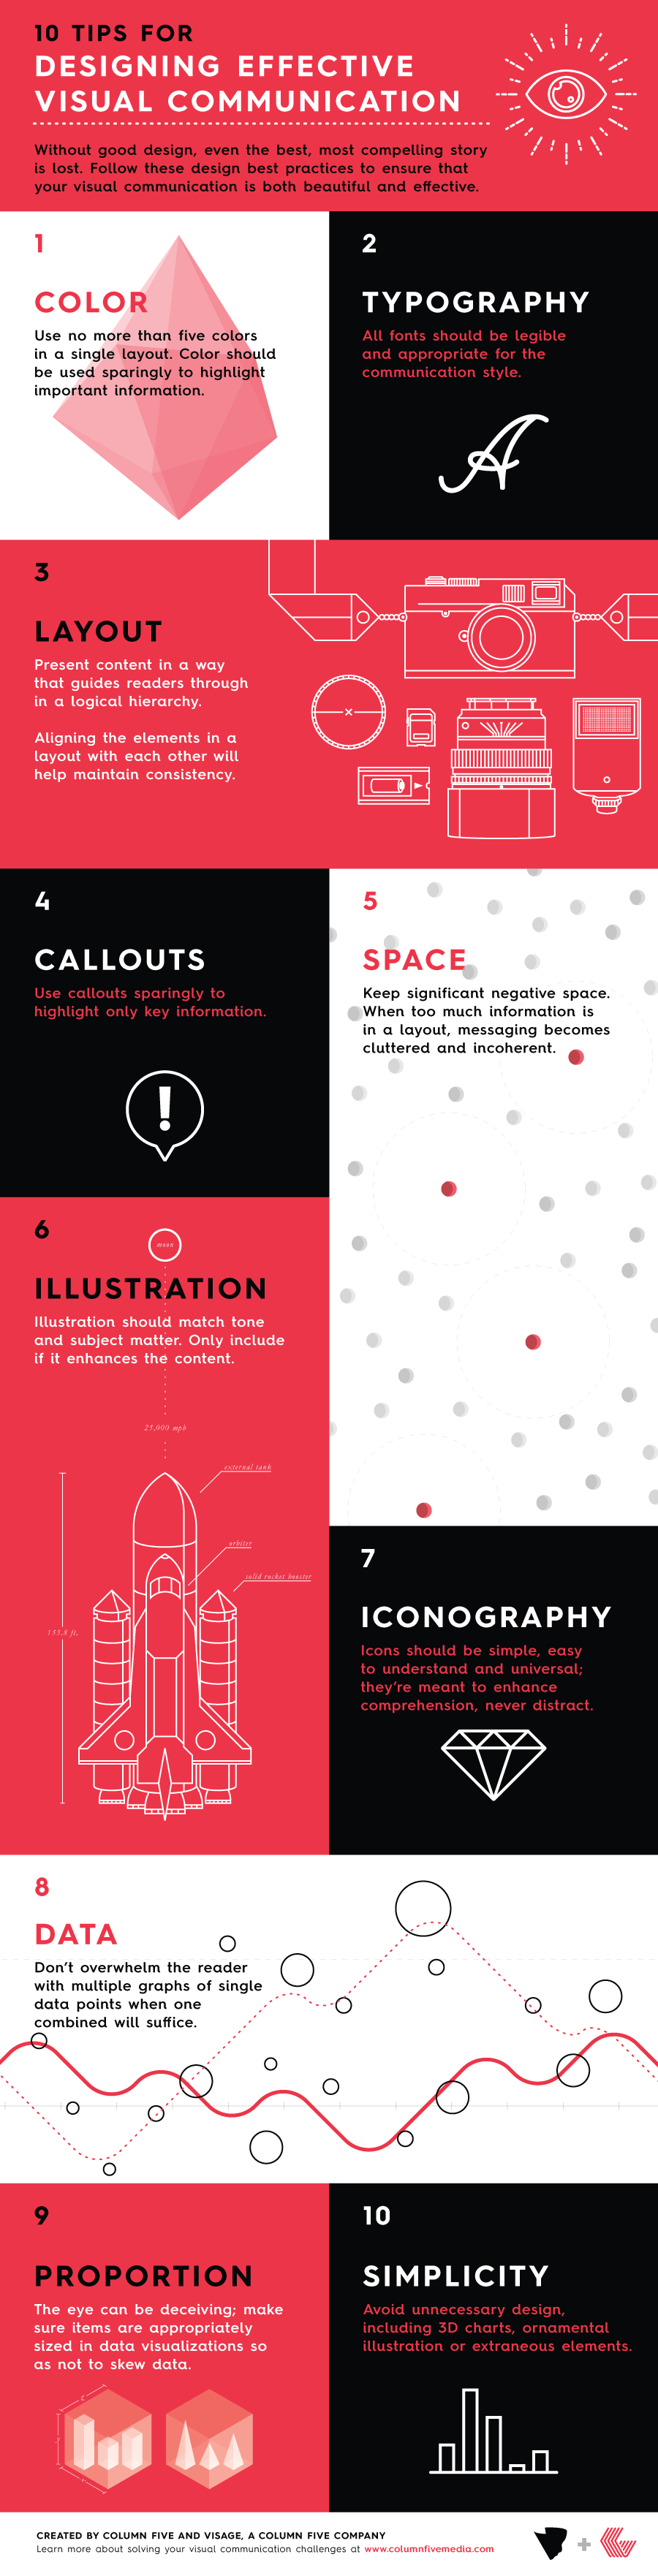 visual content visual communication infographic design tips